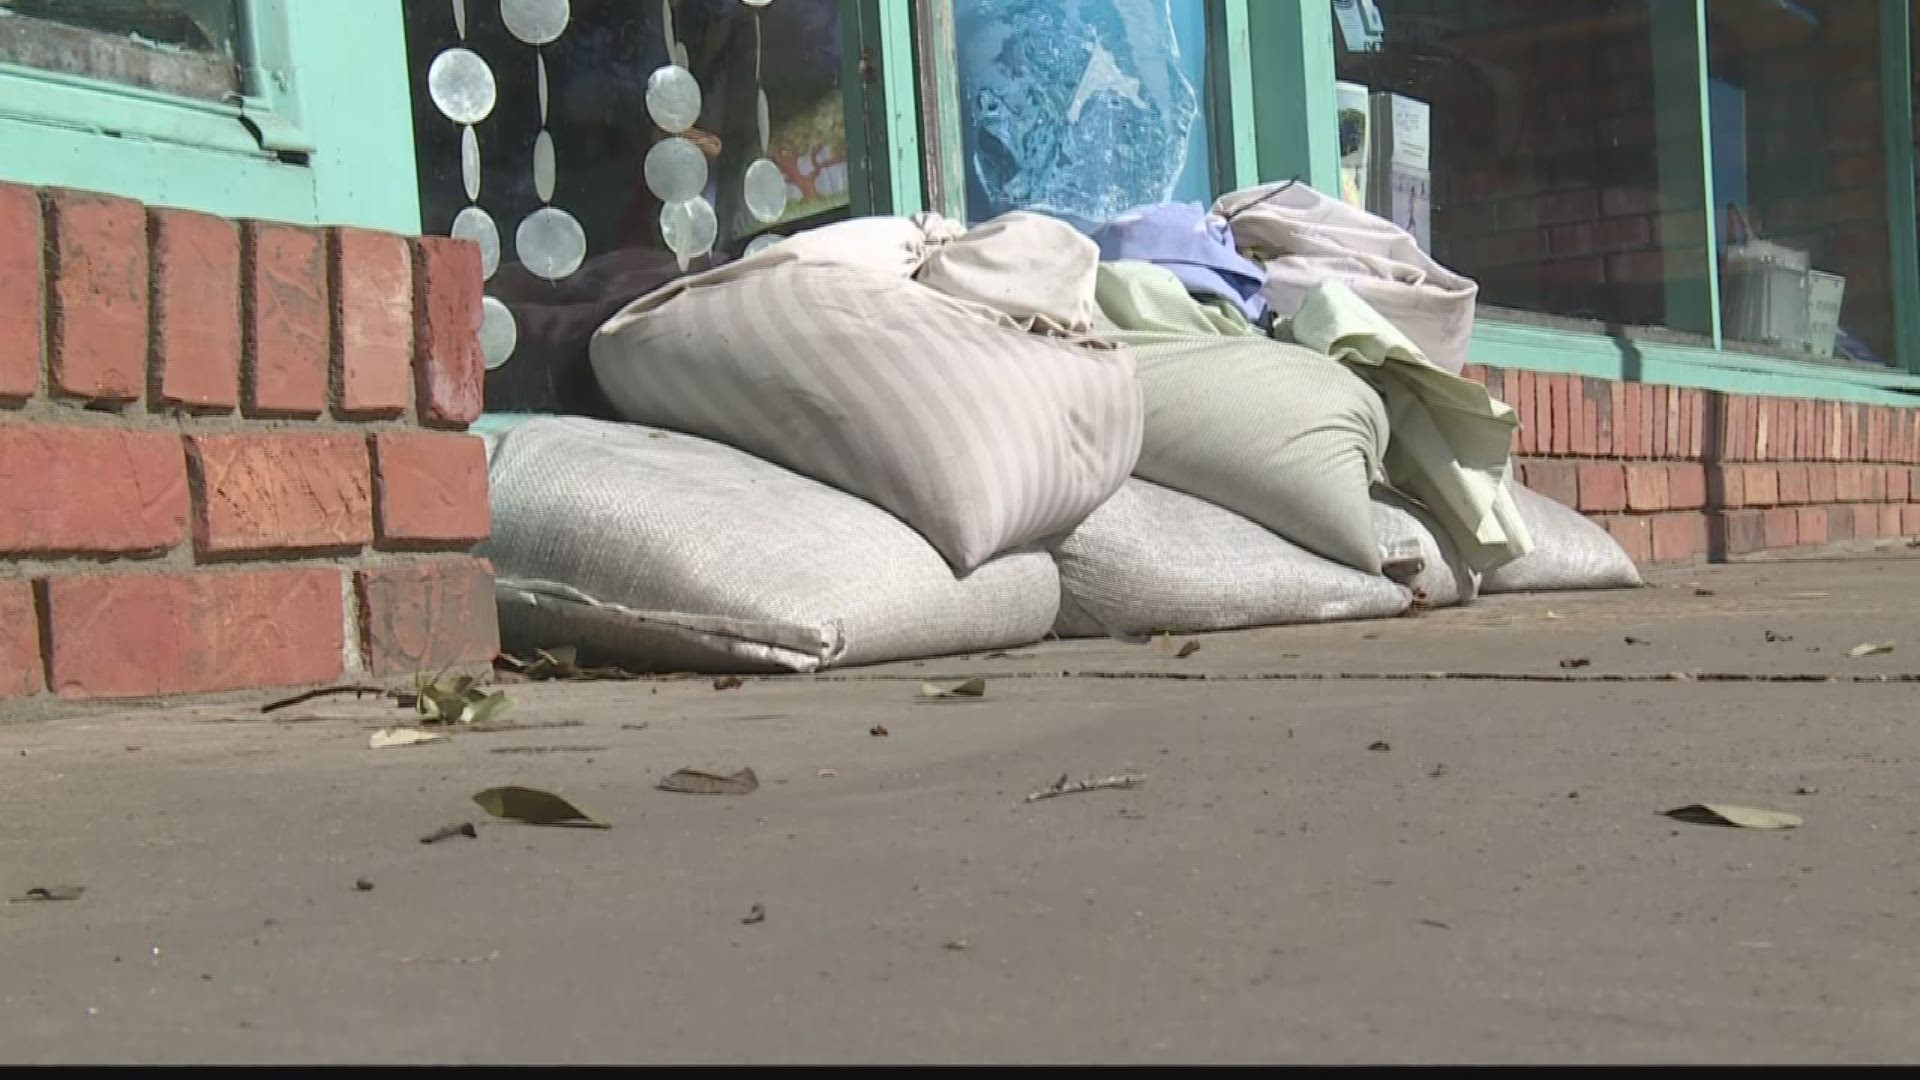 It's an area that was hit hard by Hurricane Irma. And for the first time, Glynn County residents are now allowed to go back and see the damage the hurricane left behind.